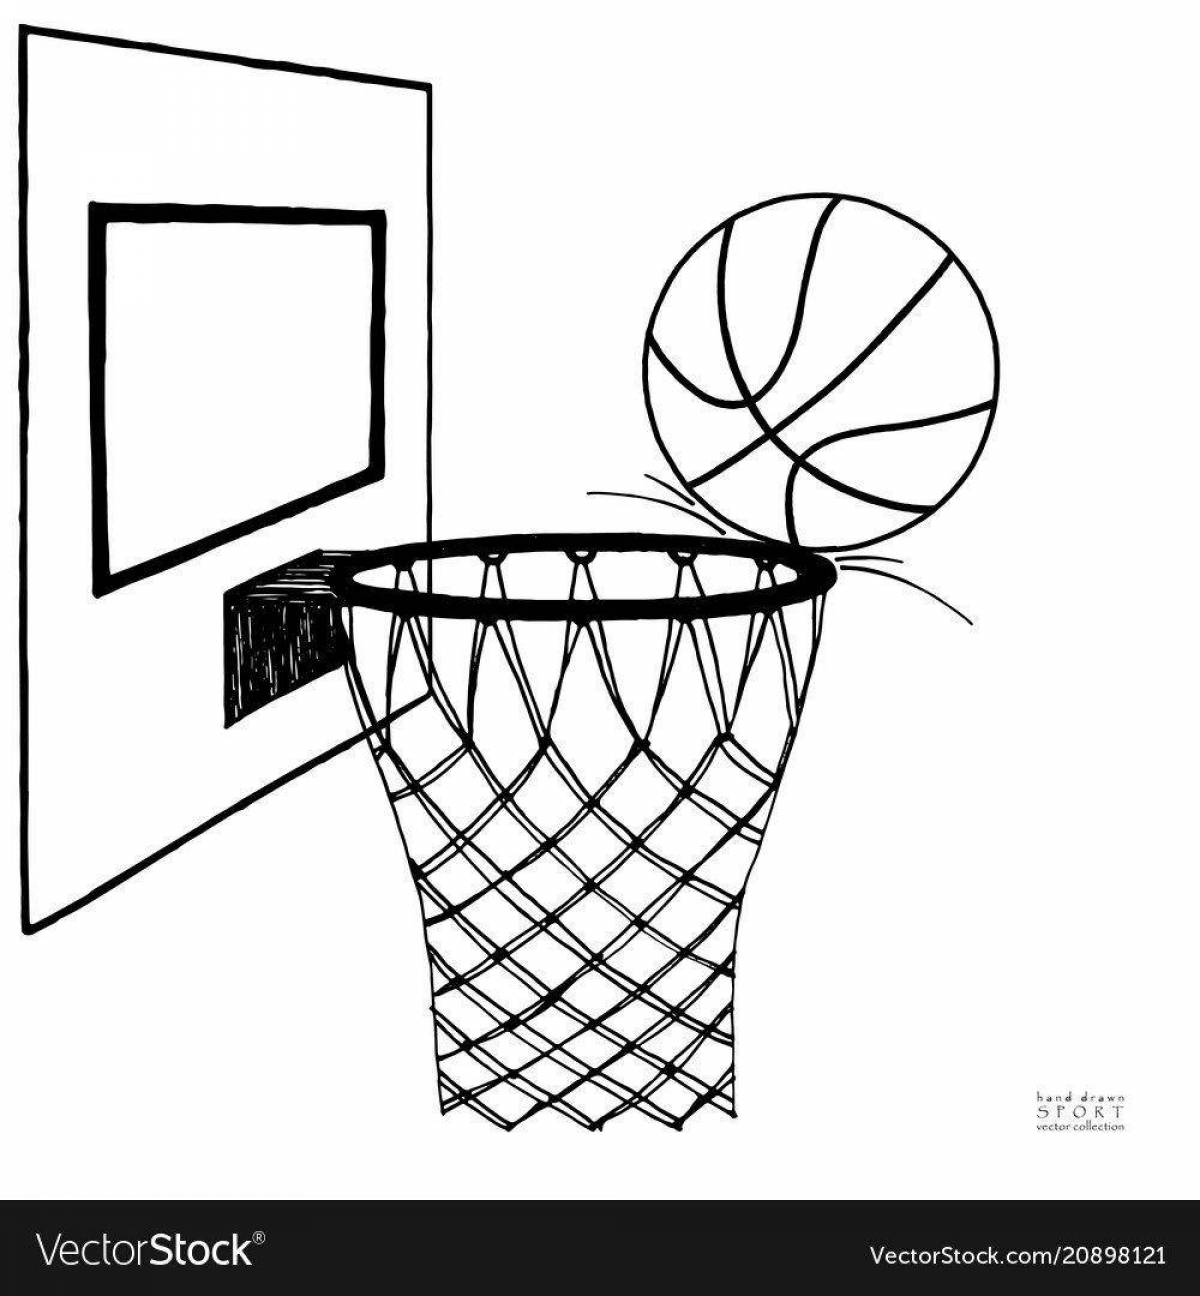 Adorable basketball hoop coloring page